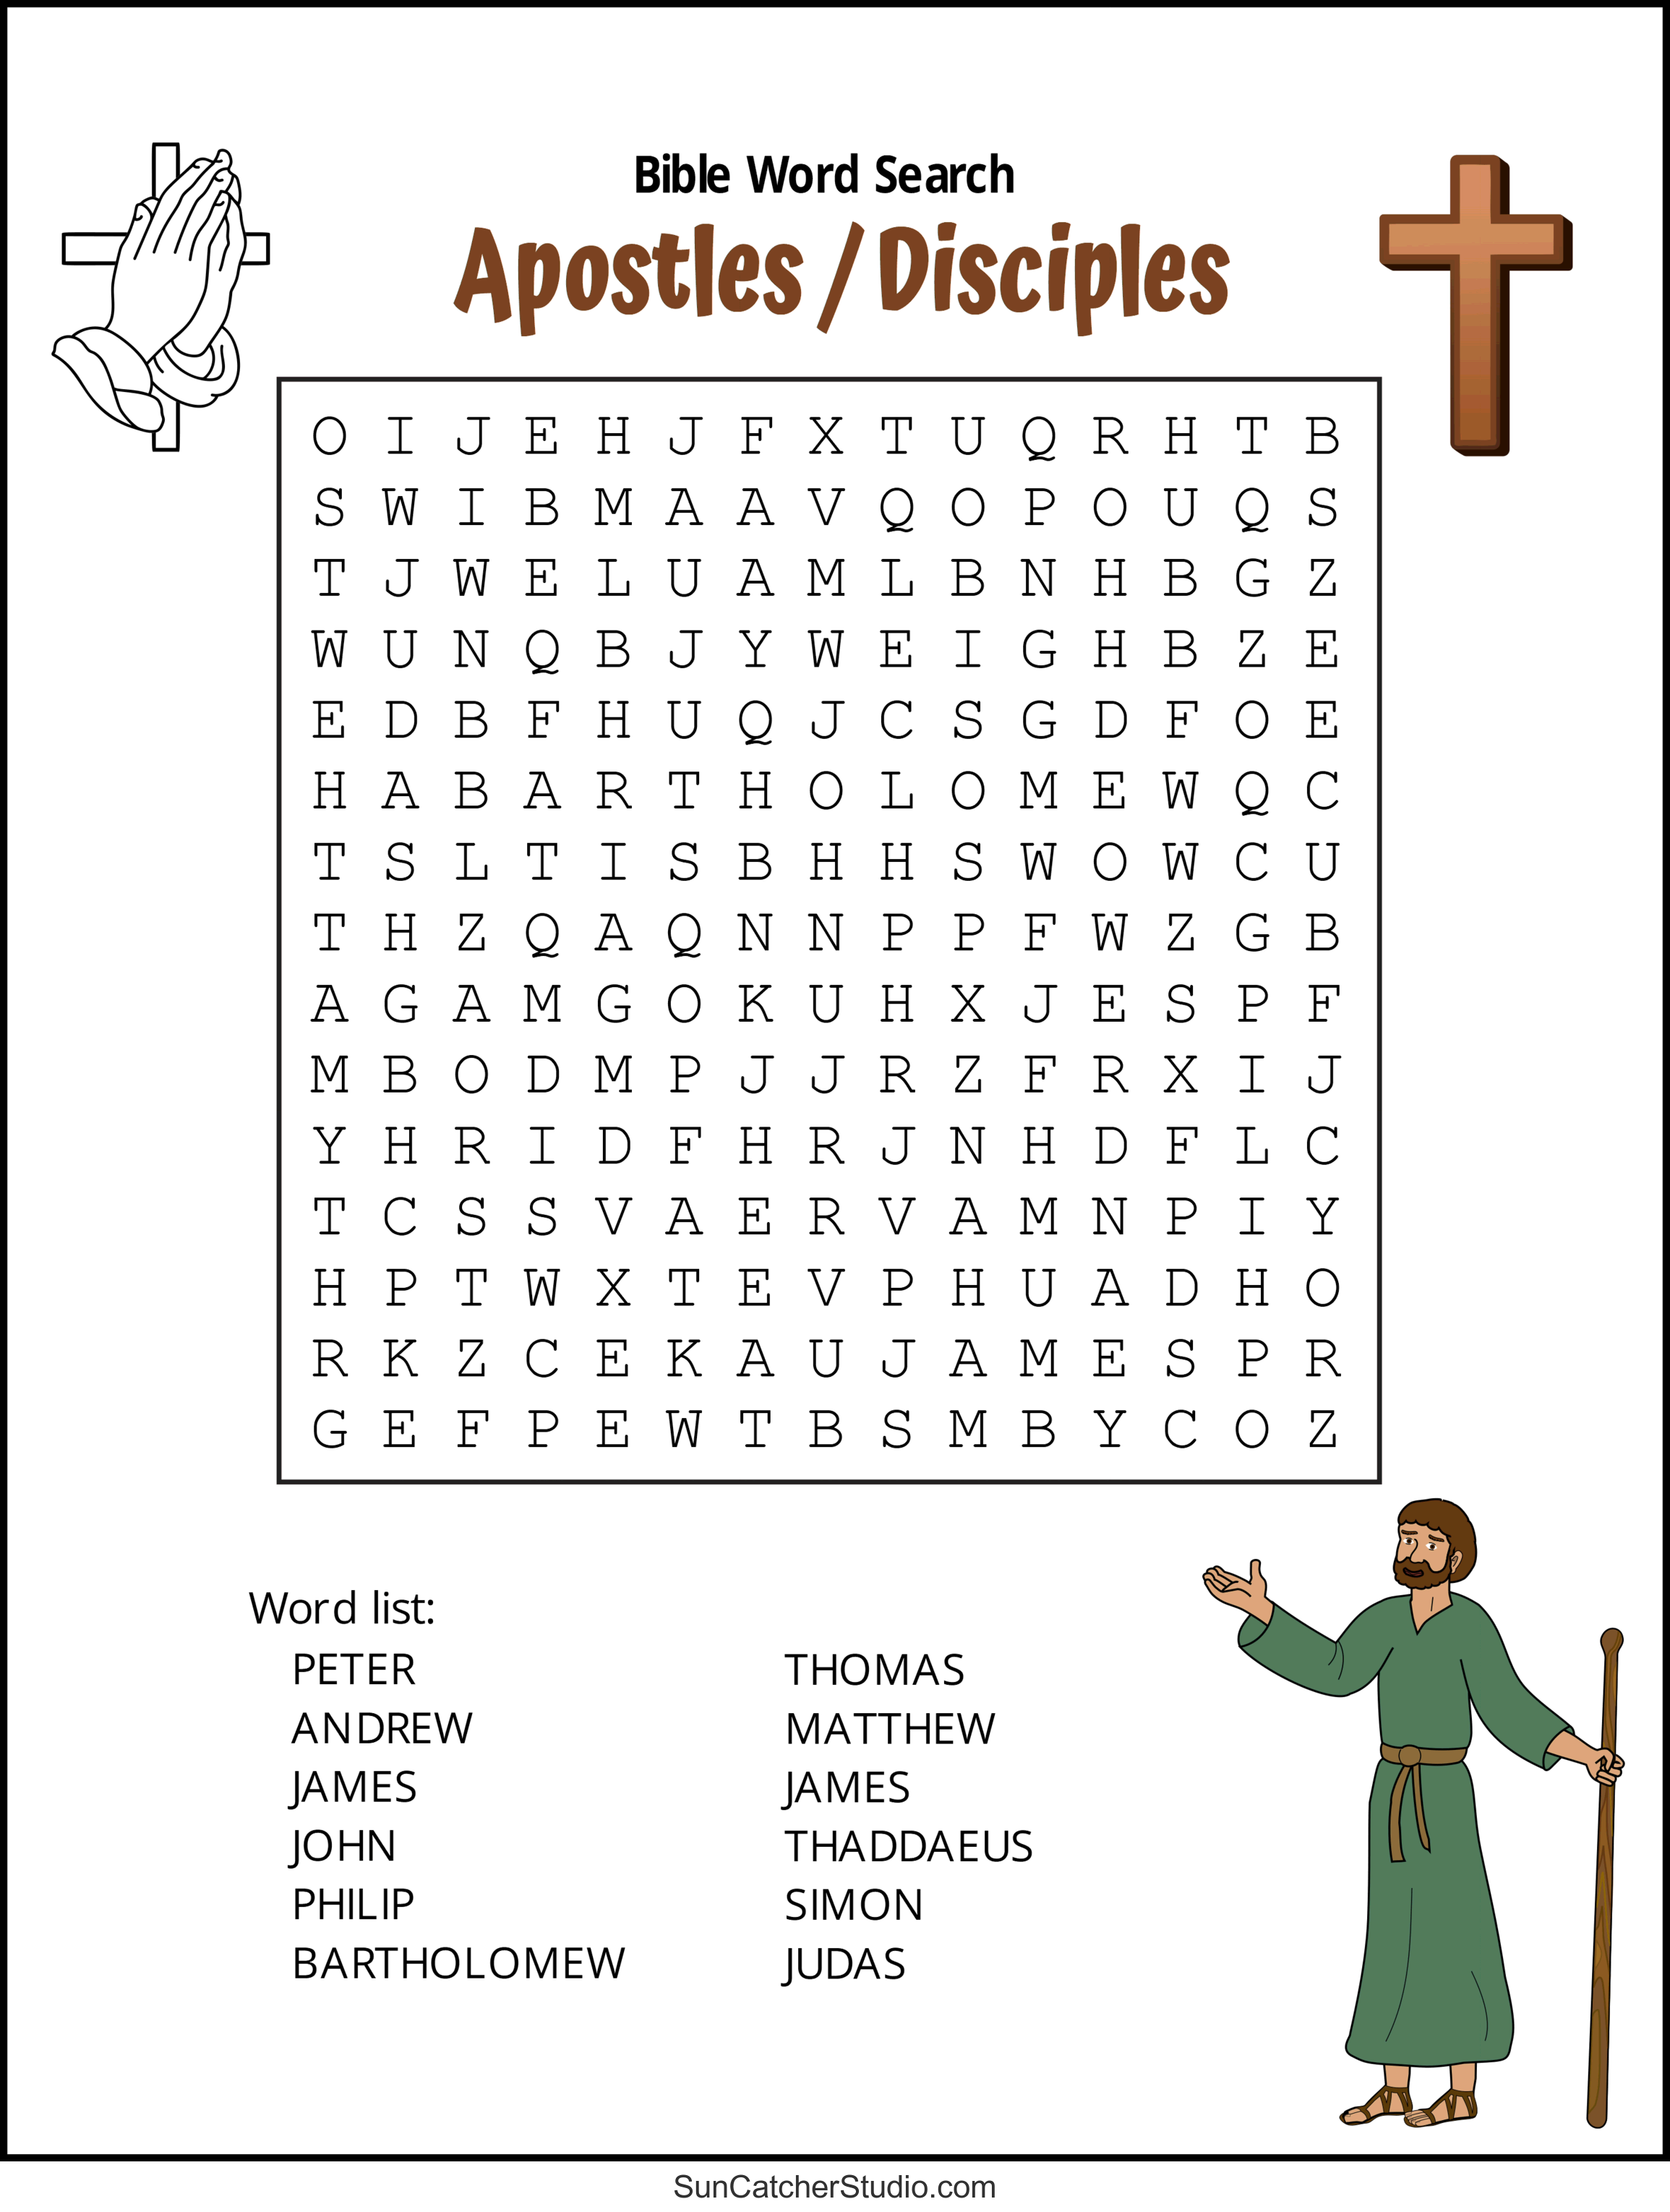 bible-word-search-free-printable-christian-puzzles-diy-projects-patterns-monograms